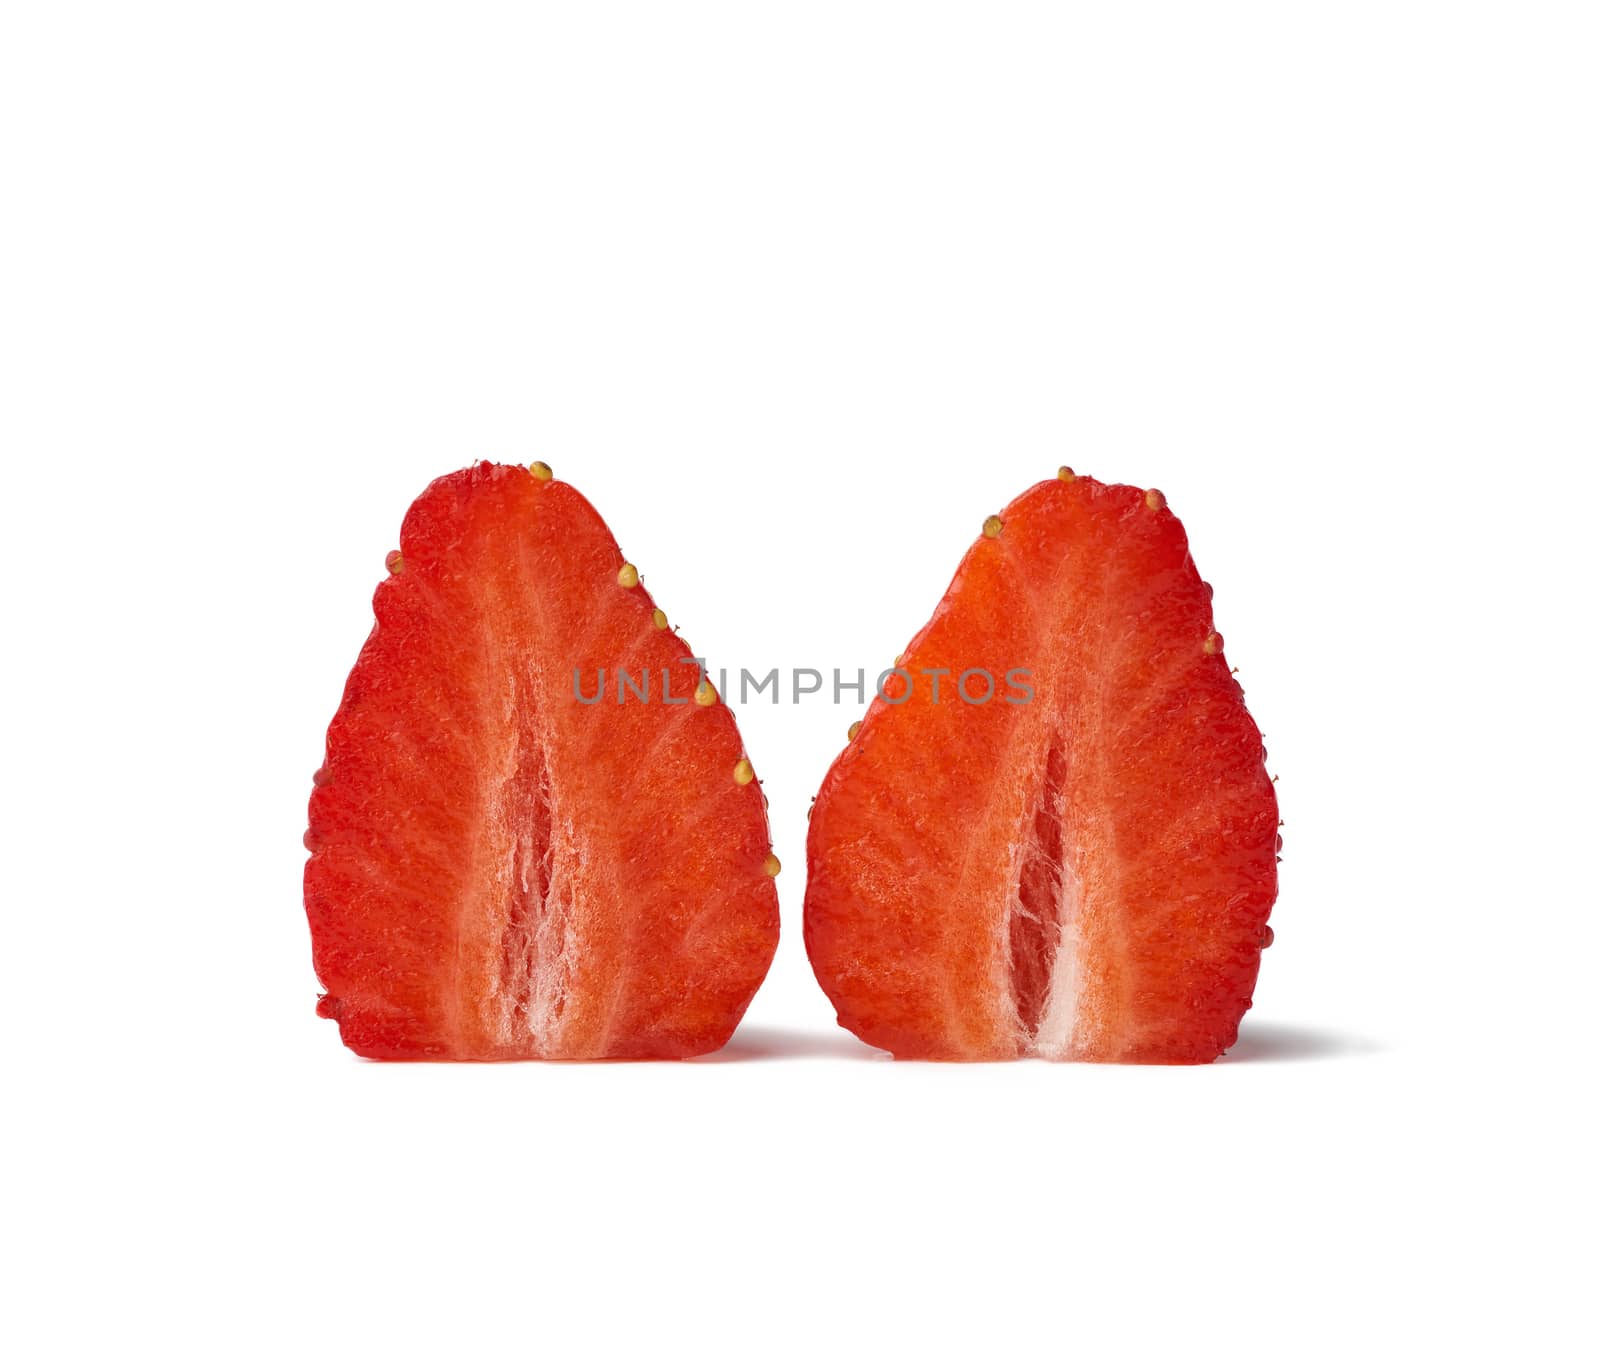 two halves of red ripe strawberries isolated on a white background, ripe fruit